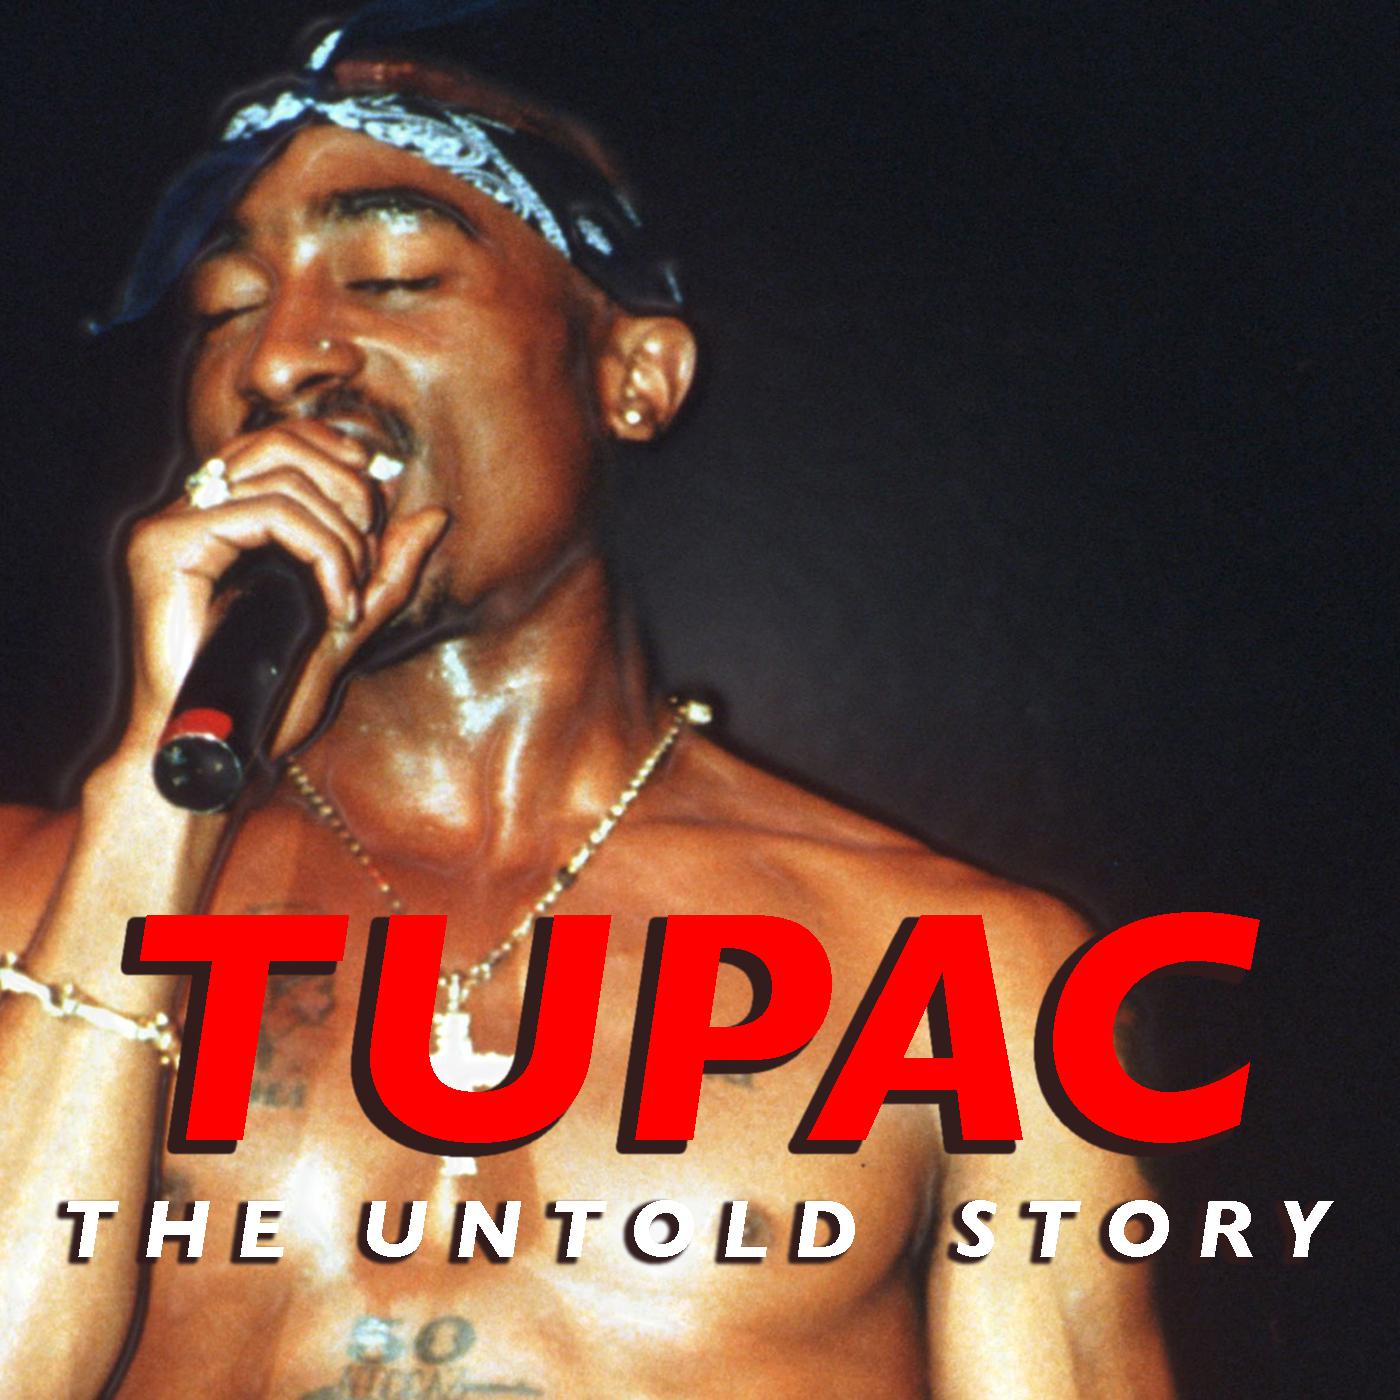 Tupac: The Untold Story